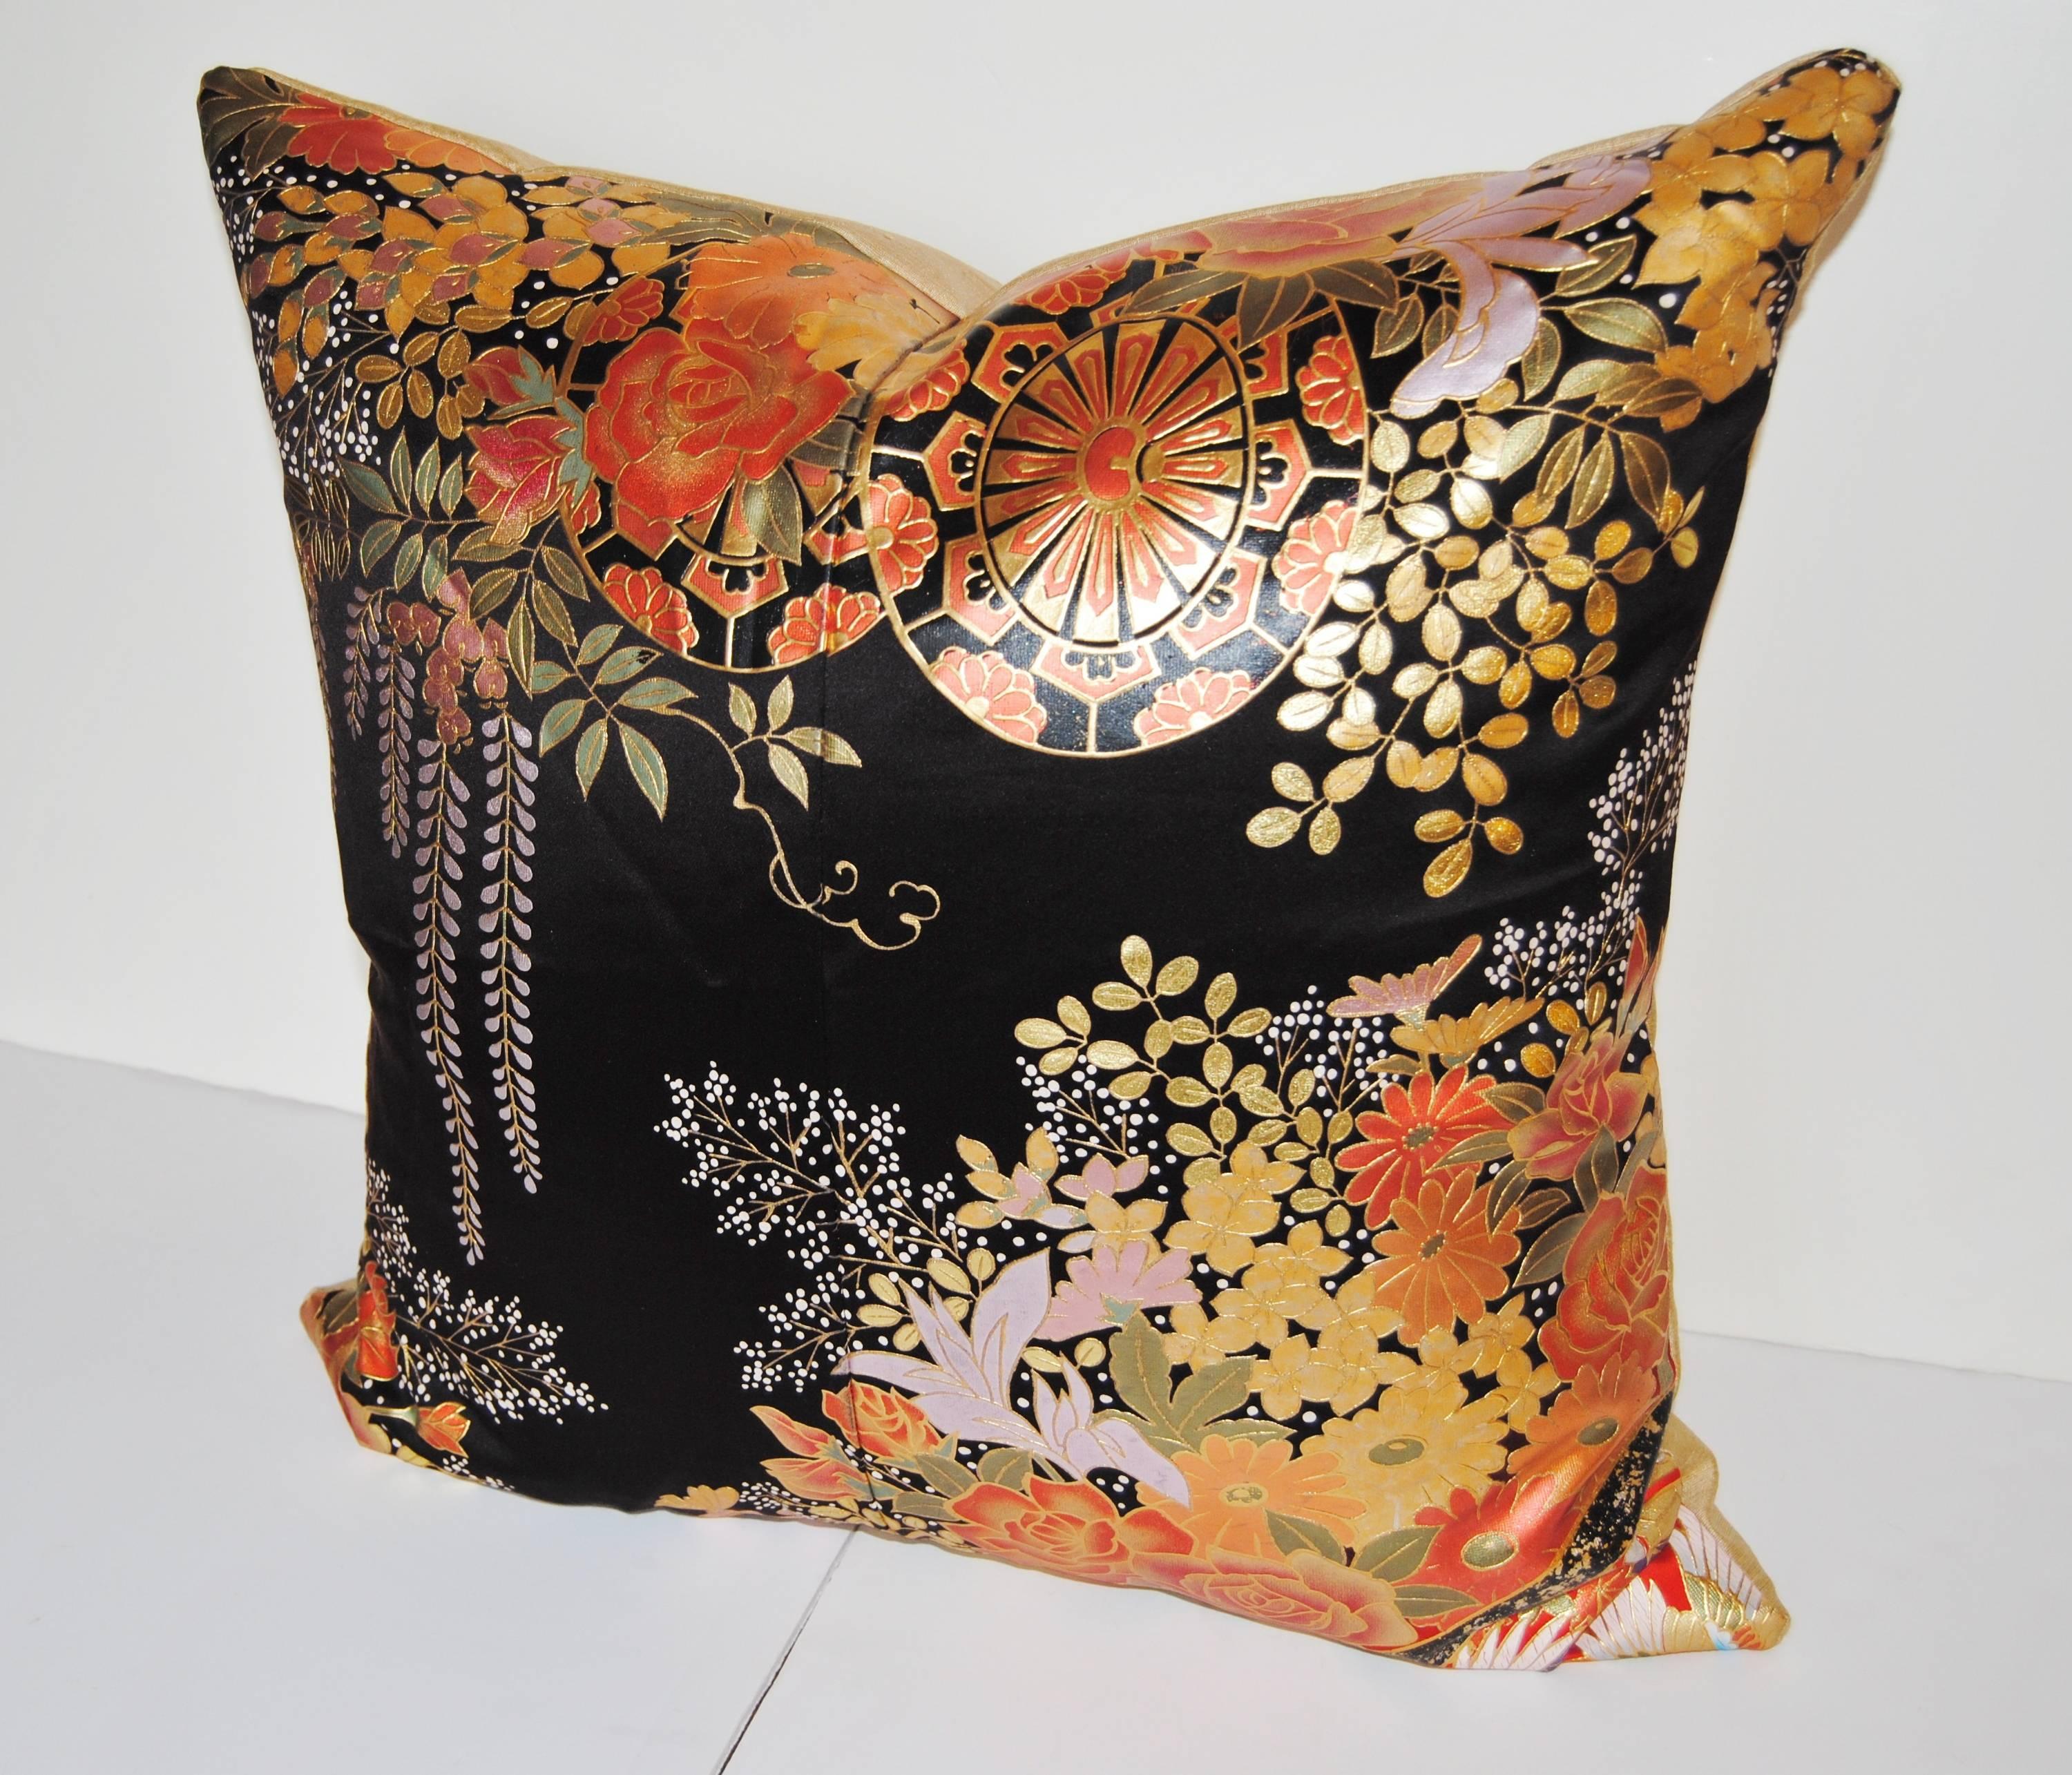 Custom pillow cut from a Uchikake, vintage wedding kimono. The textile is hand-painted silk. Japanese silk is 14